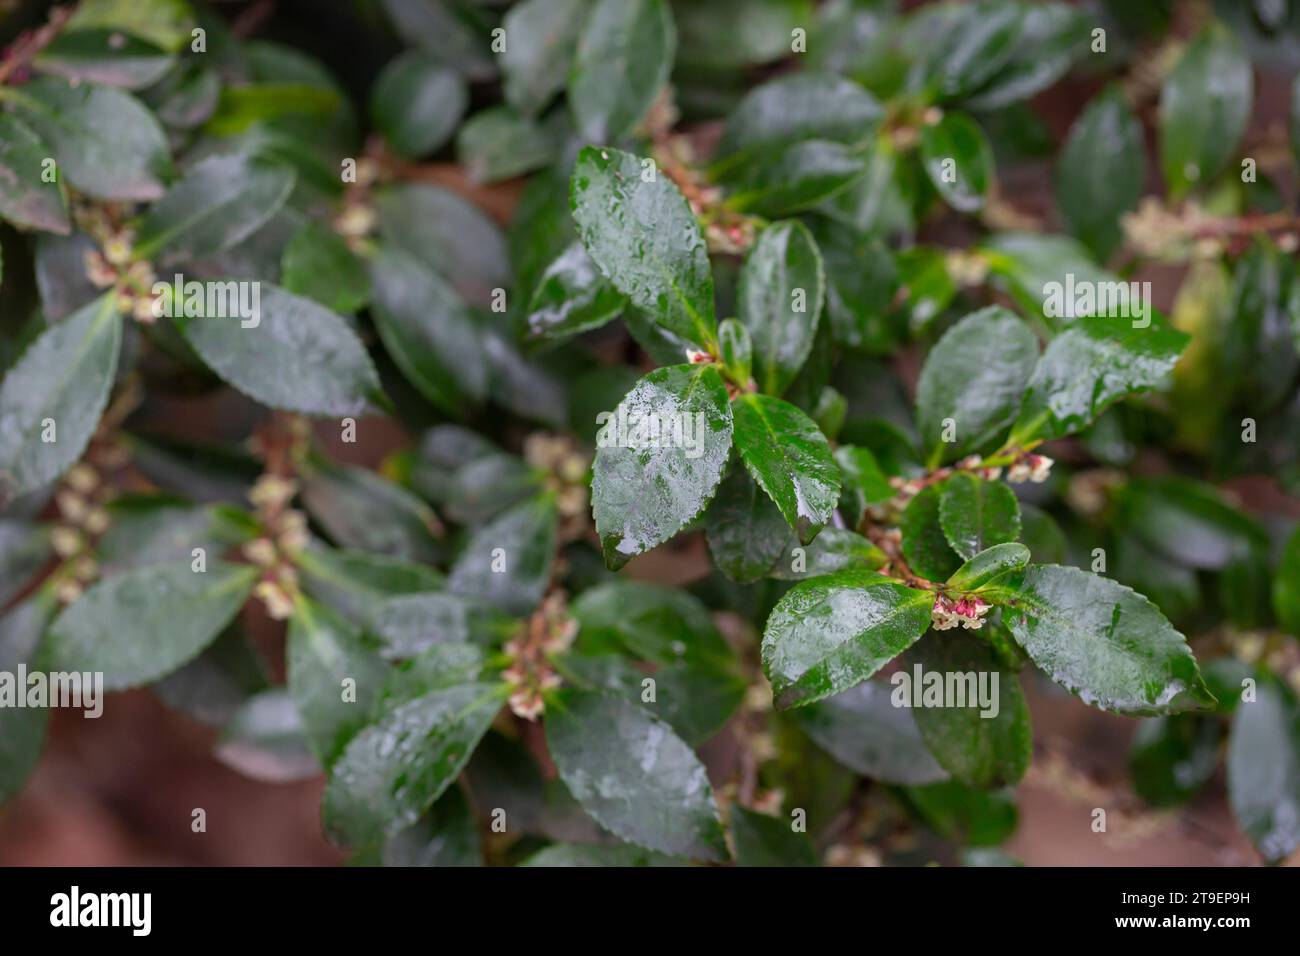 Green leaves and white buds of Eurya japonica in raindrops, selective focus. Background of green leaves in spring, Stock Photo